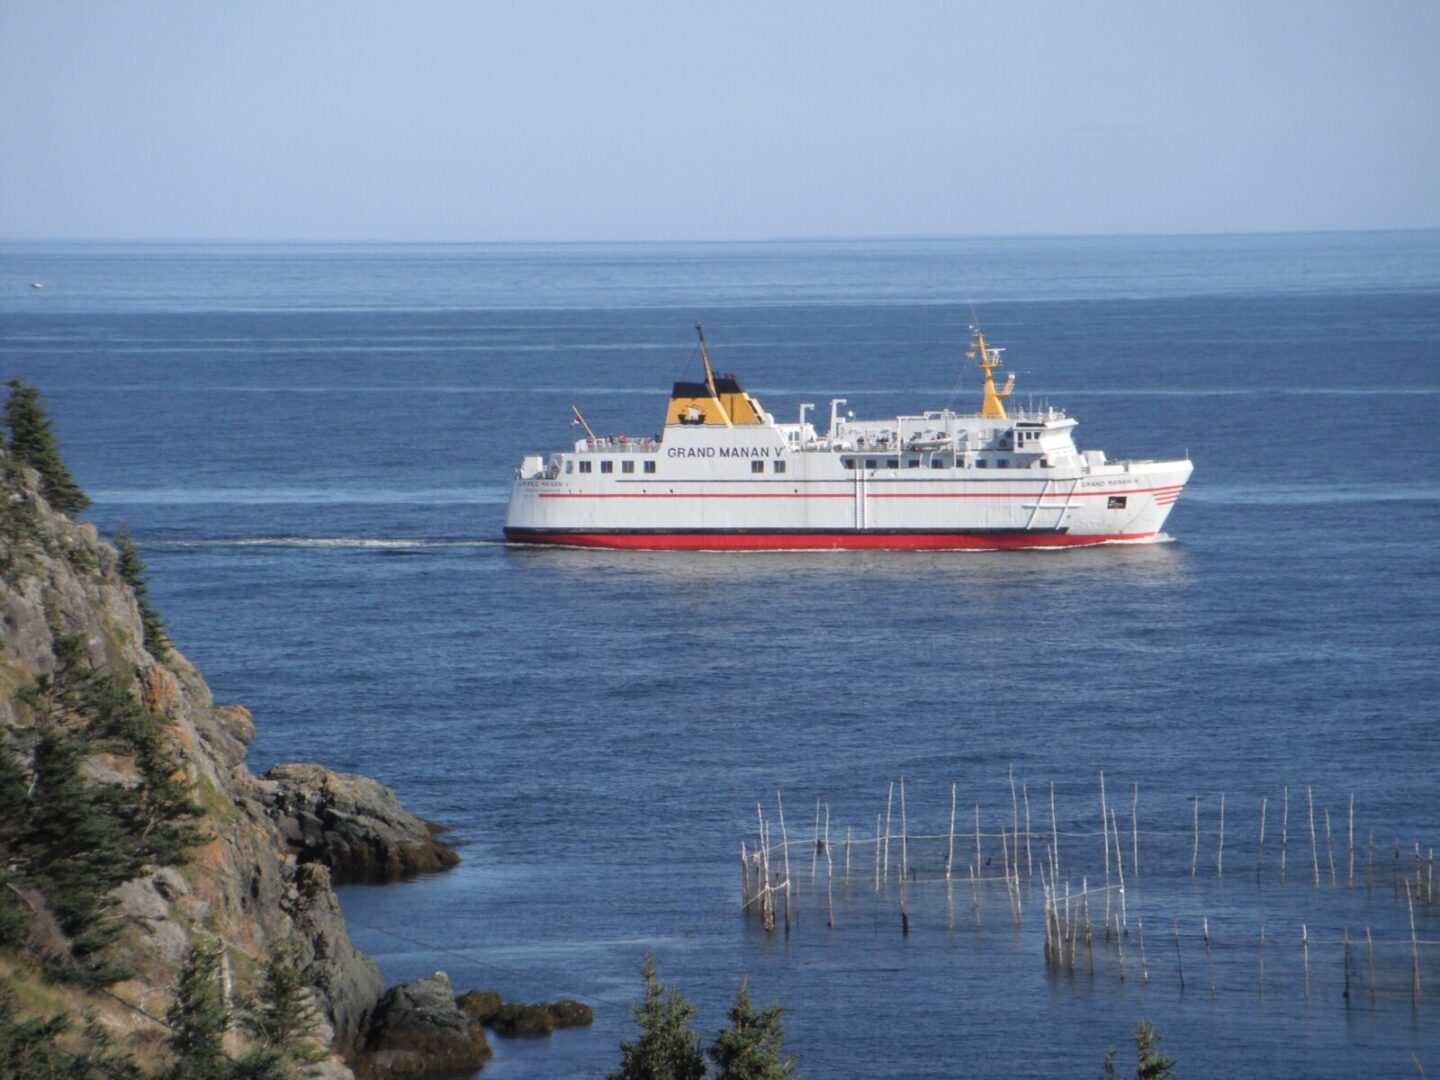 A white and red ferry is sailing in the ocean near a rocky shore.